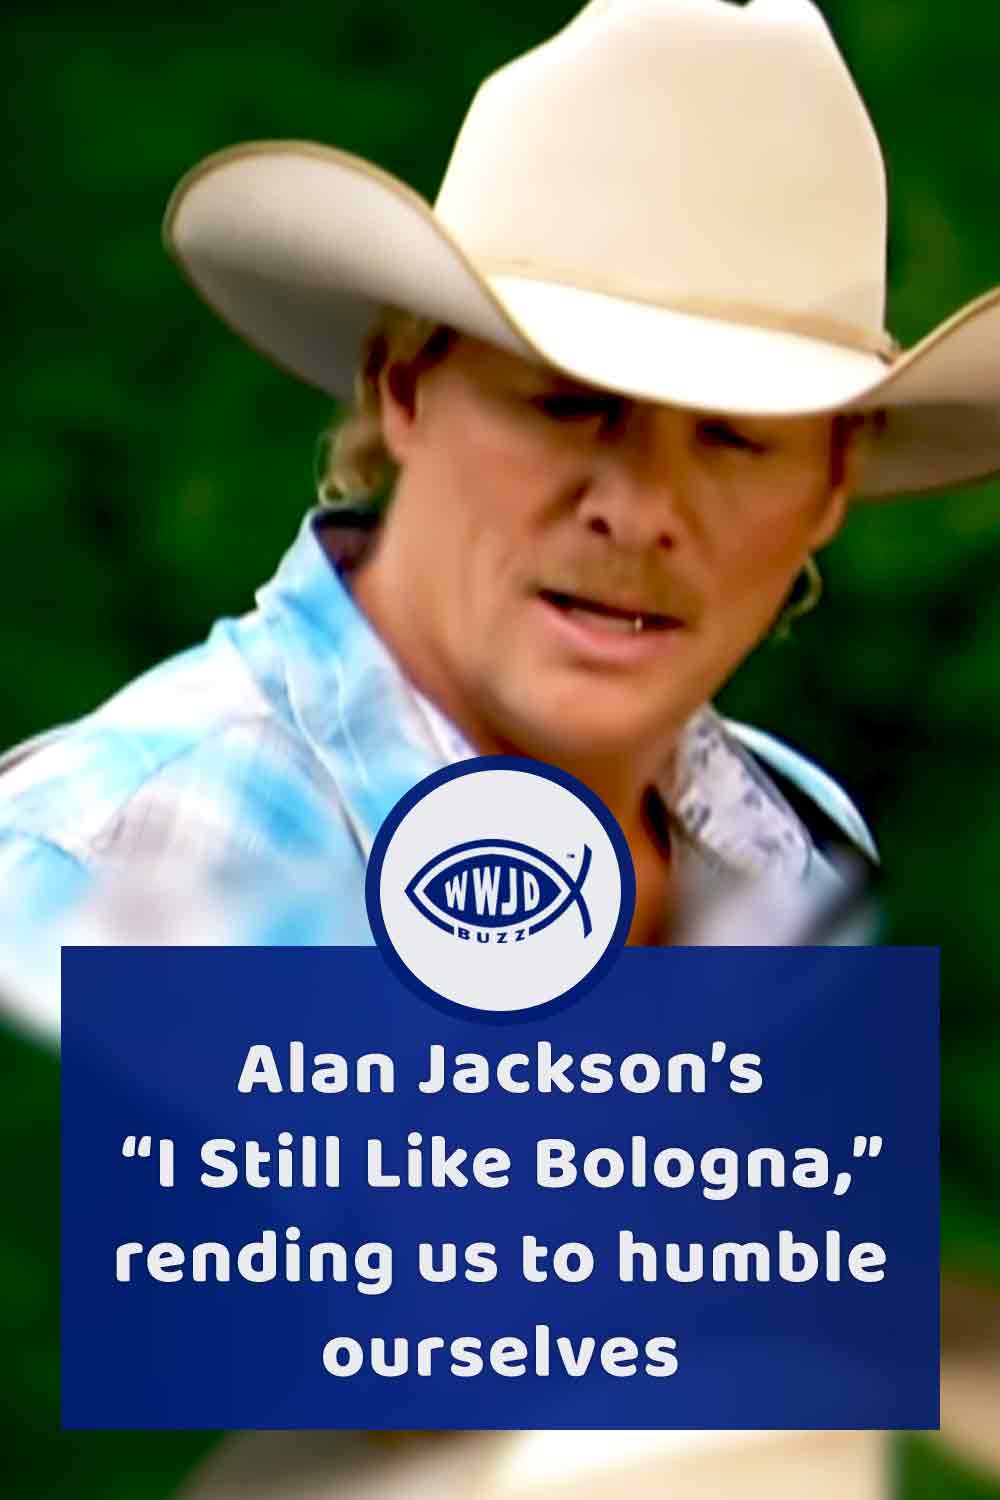 Alan Jackson’s “I Still Like Bologna,” rending us to humble ourselves